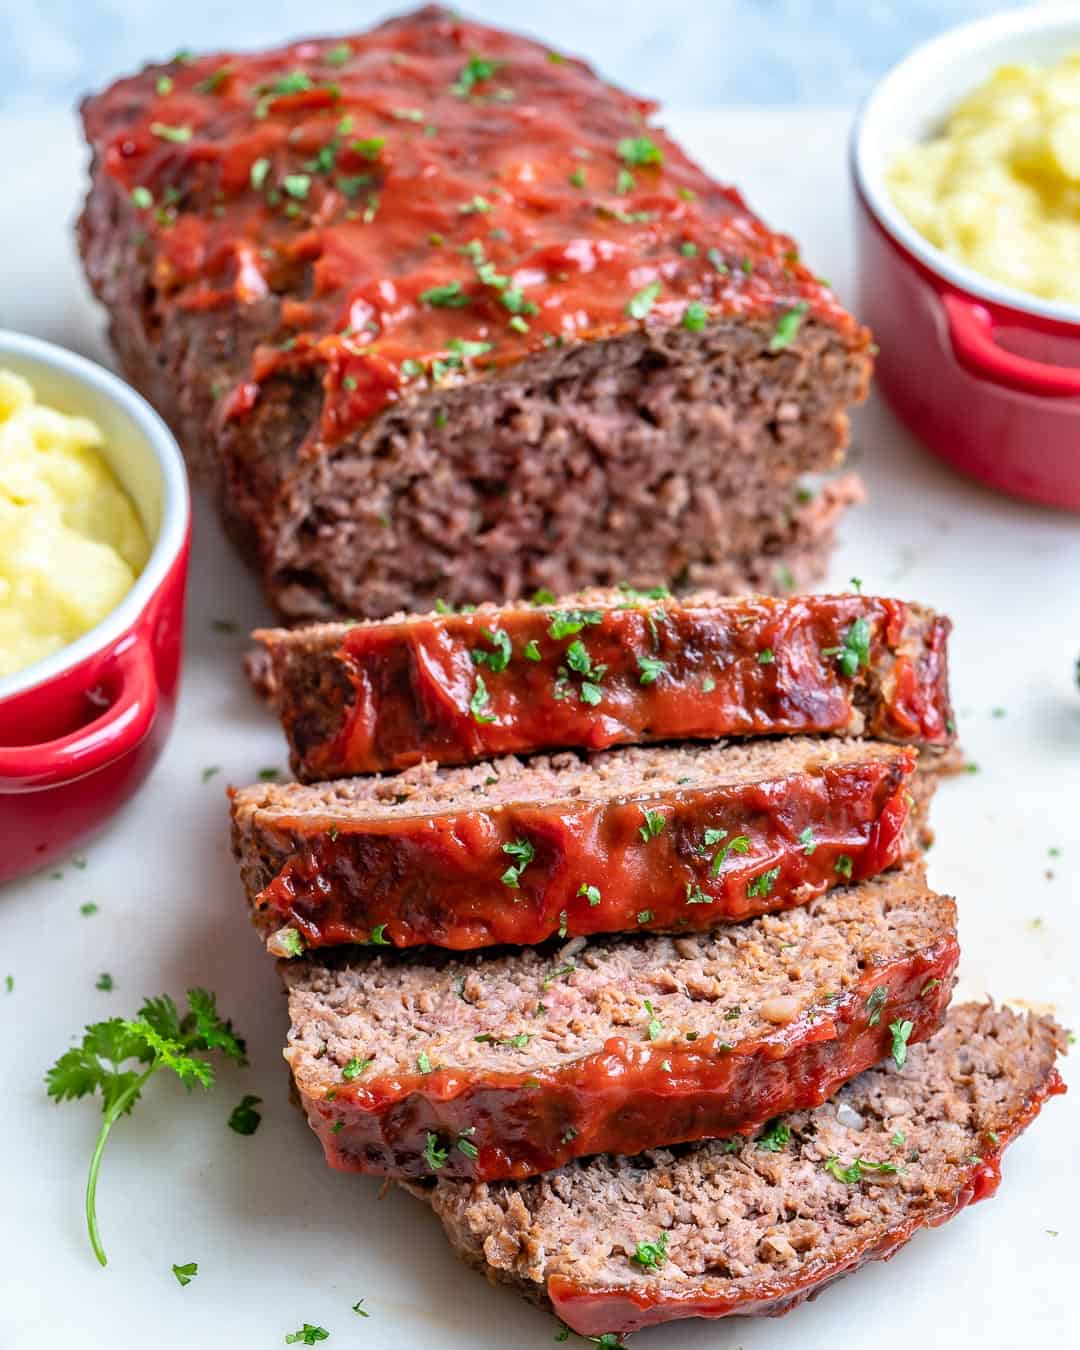 Easy Homemade Meatloaf Recipe Healthy Fitness Meals,Pictures Of Ducks Landing On Water